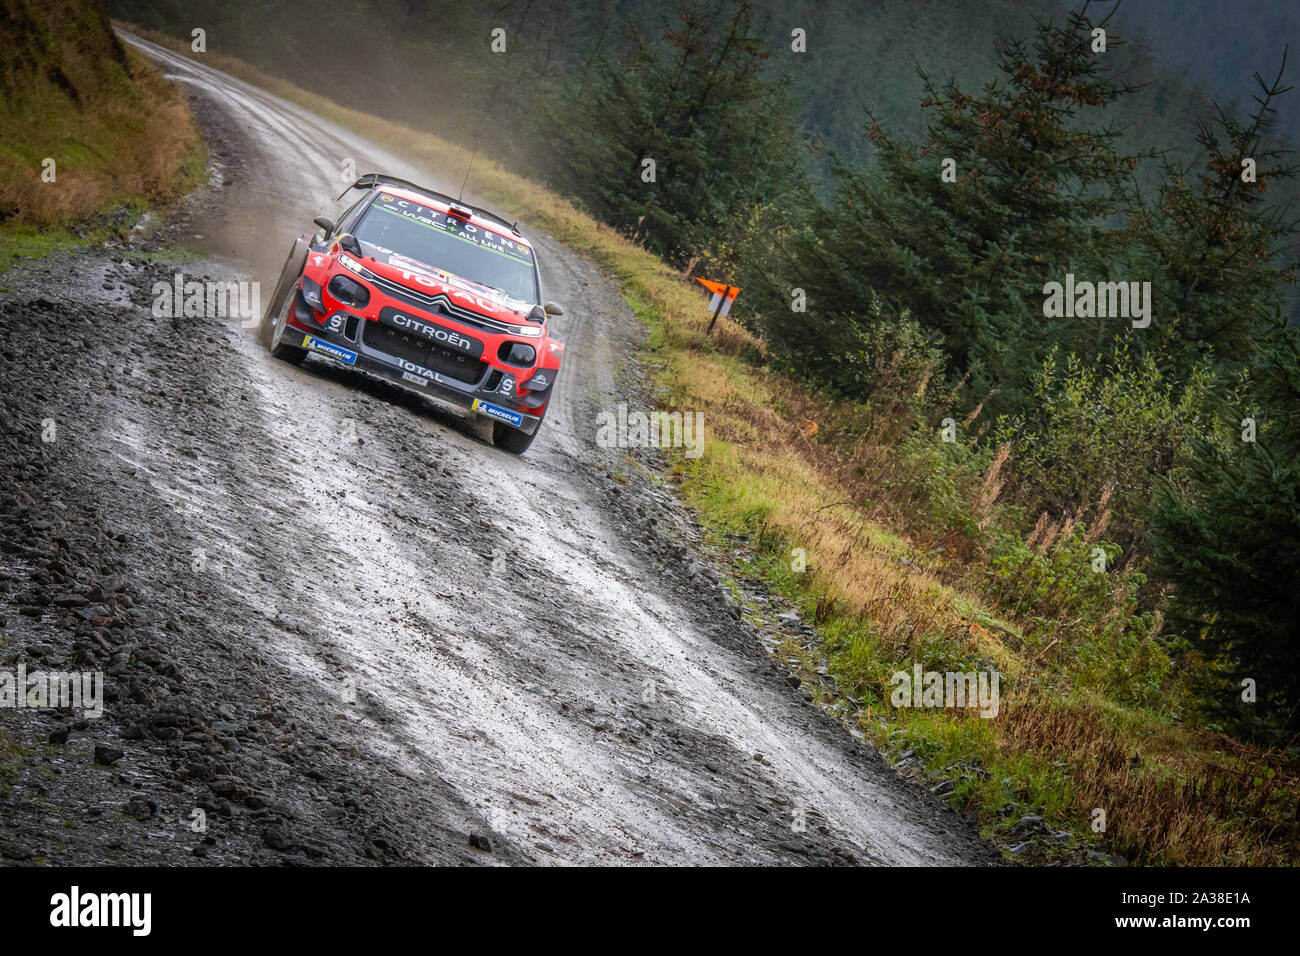 Esapekka Lappi (Finland) driving through the Myherin stage of Wales Rally GB 2019 in the Citroen C3 WRC World Rally Car Stock Photo